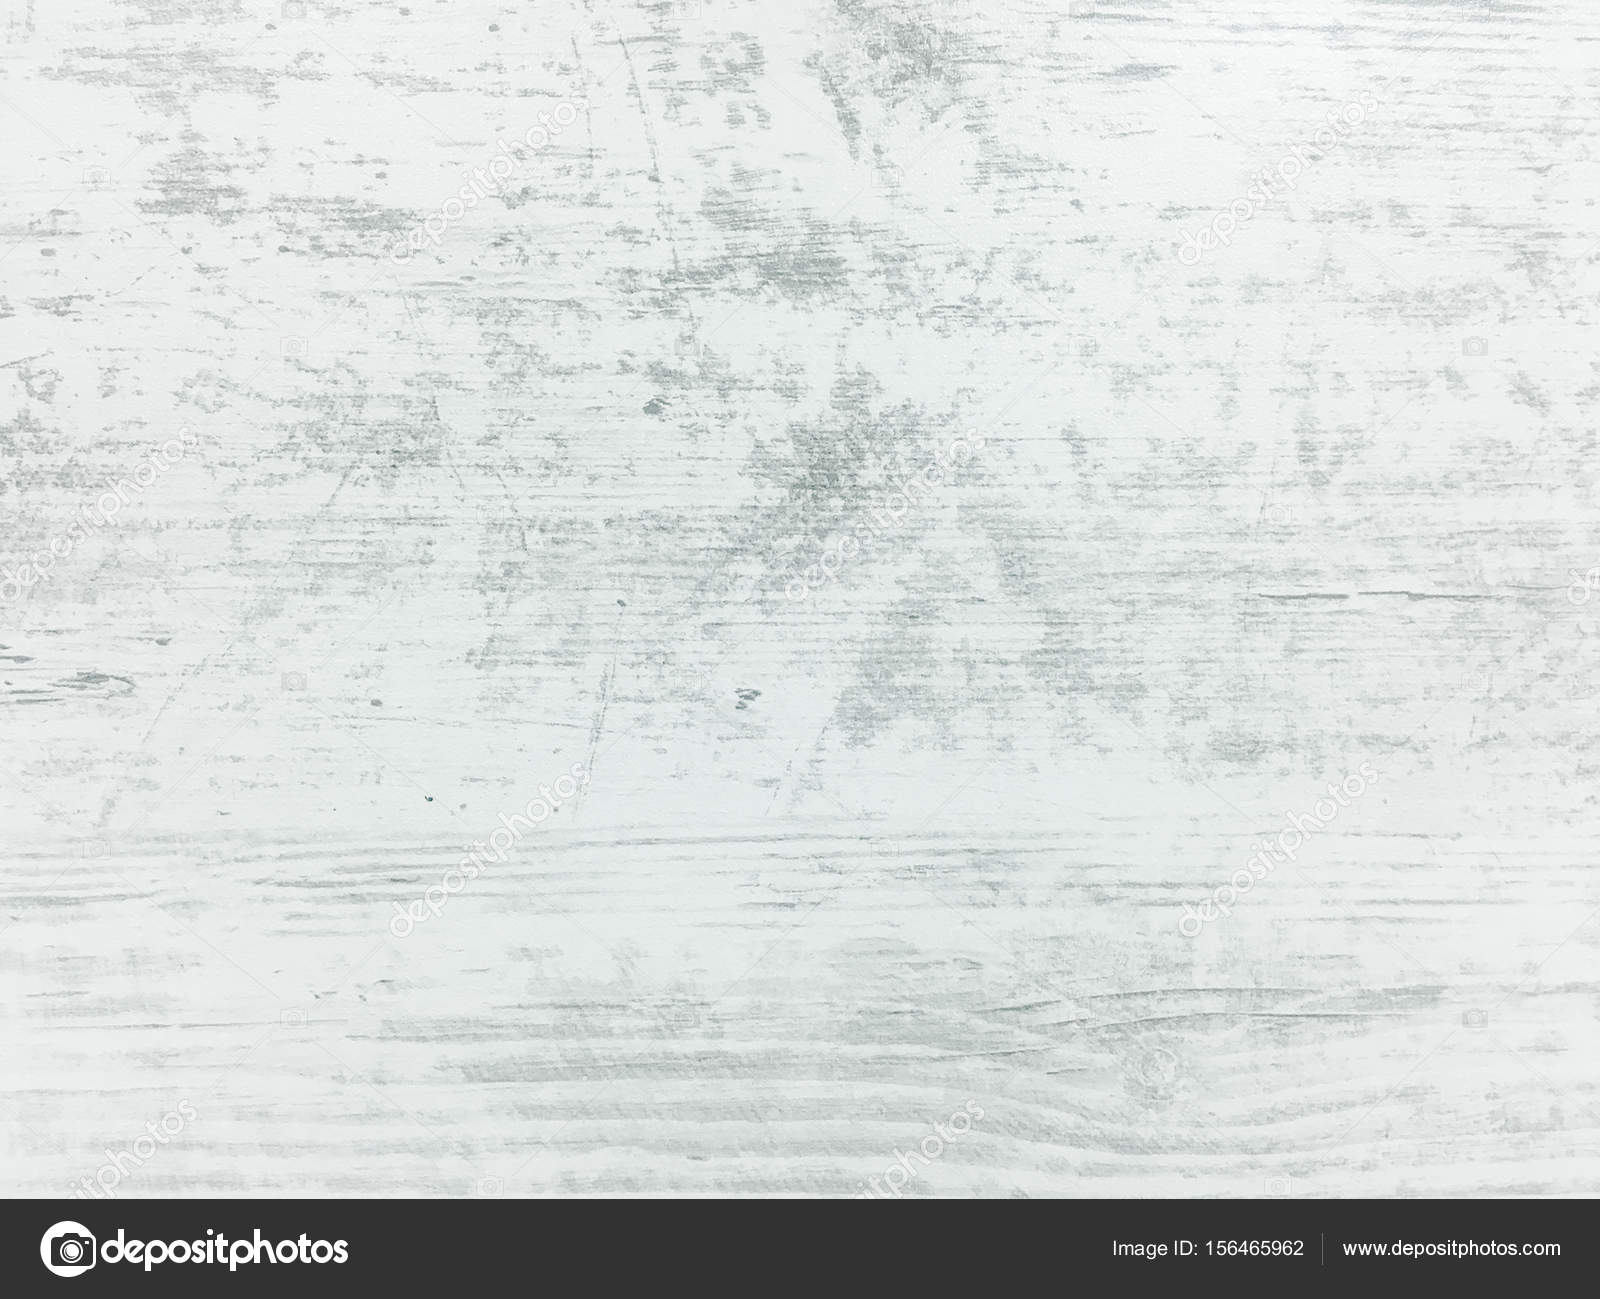 White Organic Wood Texture. Light Wooden Background. Old Washed Wood ...